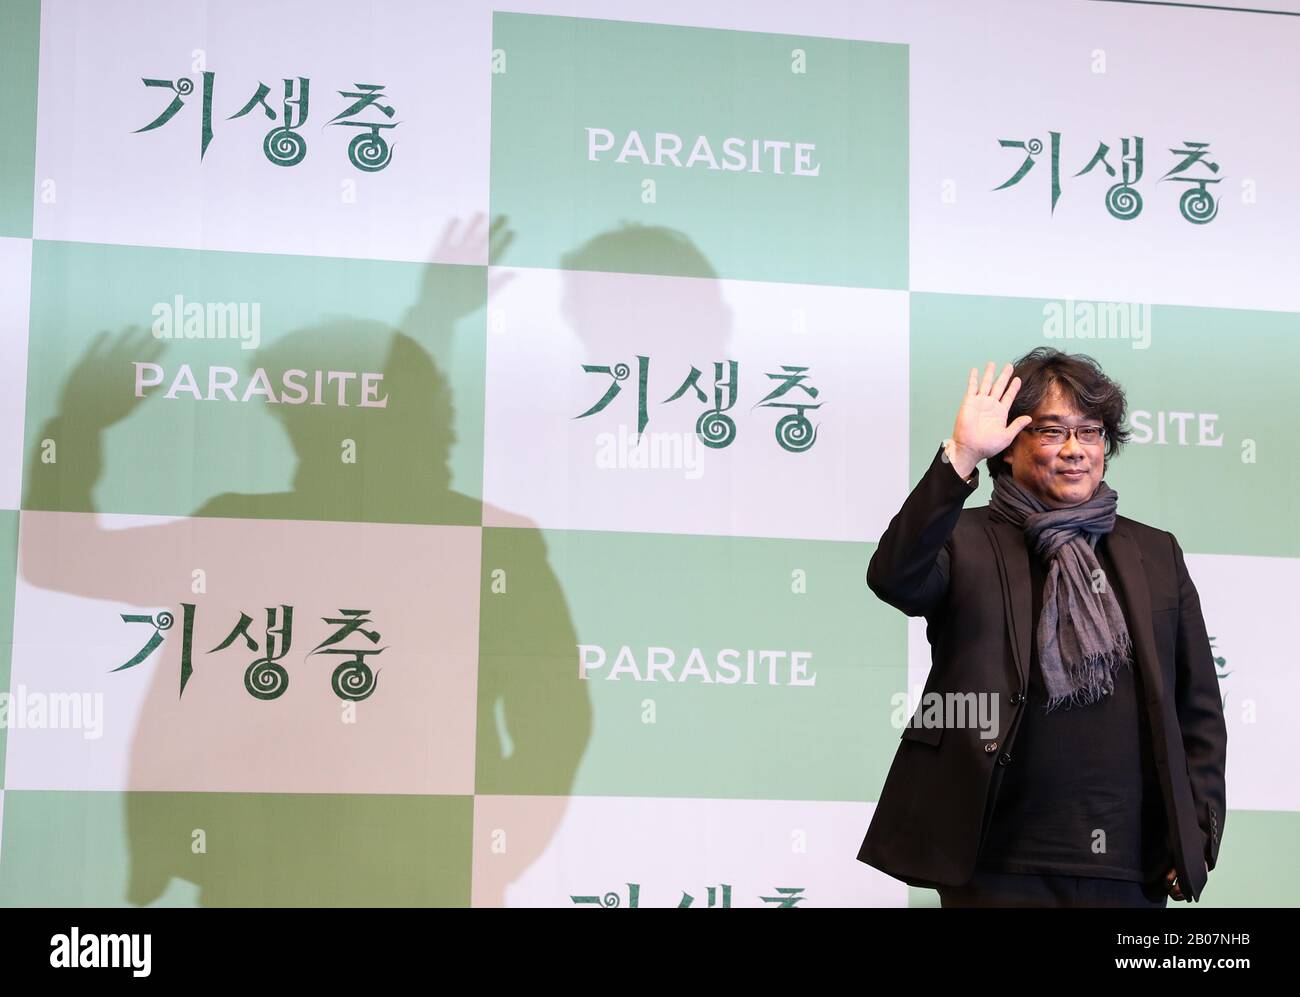 (200219) -- SEOUL, Feb. 19, 2020 (Xinhua) -- Bong Joon-ho, director of the South Korean film 'Parasite', poses for photos at a press conference in Seoul, South Korea, Feb. 19, 2020. 'Parasite', a South Korean black comedy, became the first non-English language film to win the Oscar for best picture, and also nabbed awards for best original screenplay, best international feature film and best director for Bong Joon-ho at the 92nd Academy Awards on Feb. 9, 2020. (Xinhua/Wang Jingqiang) Stock Photo